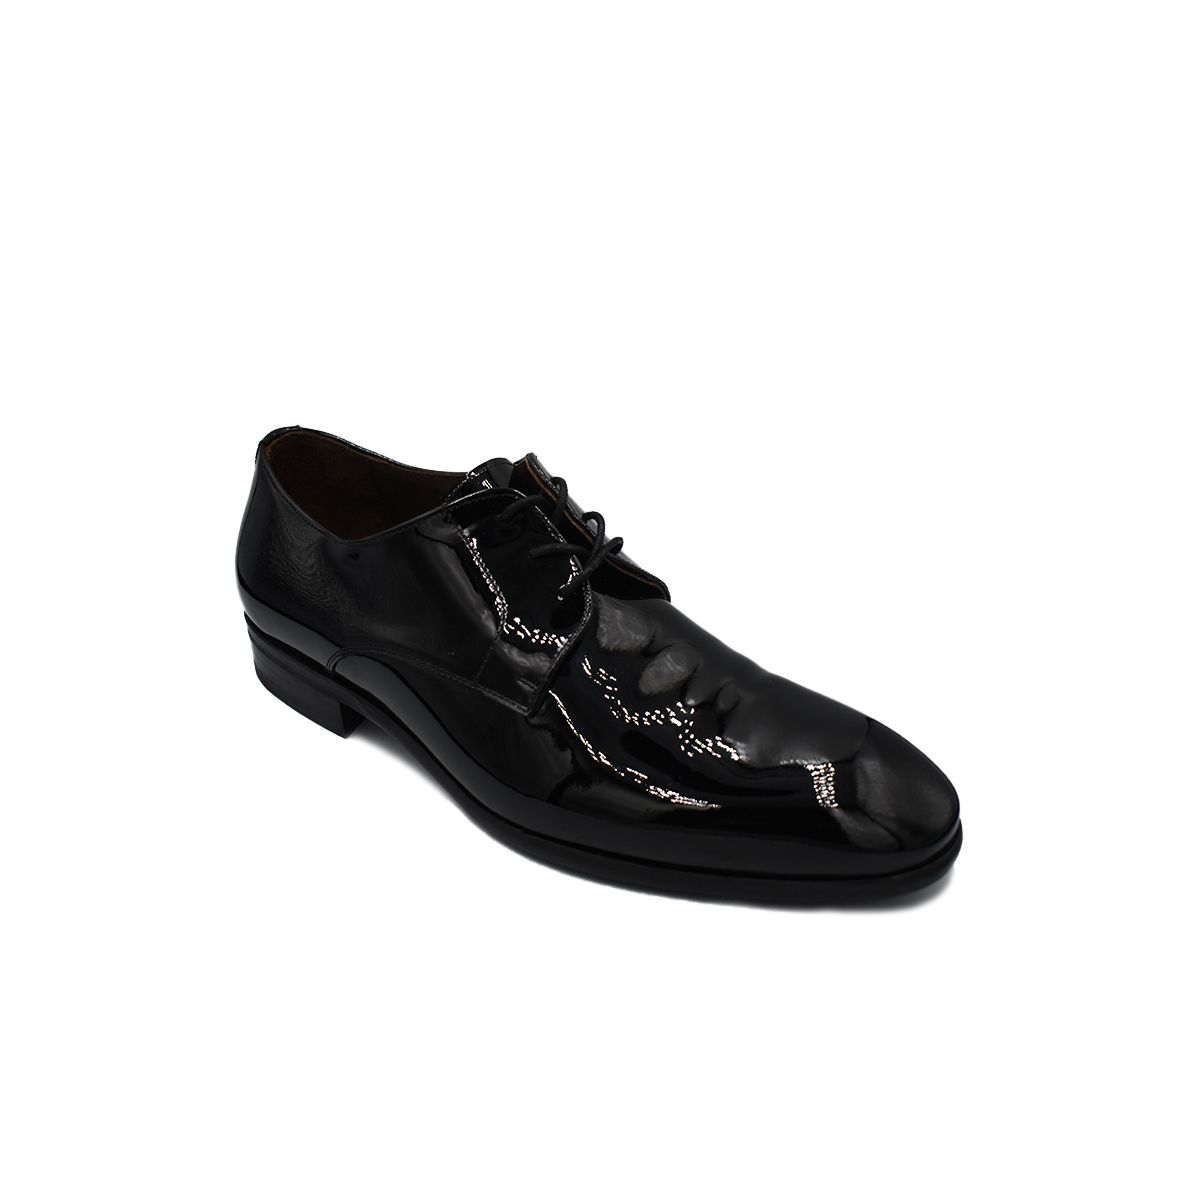 Black Leather Lace-Up Shoes